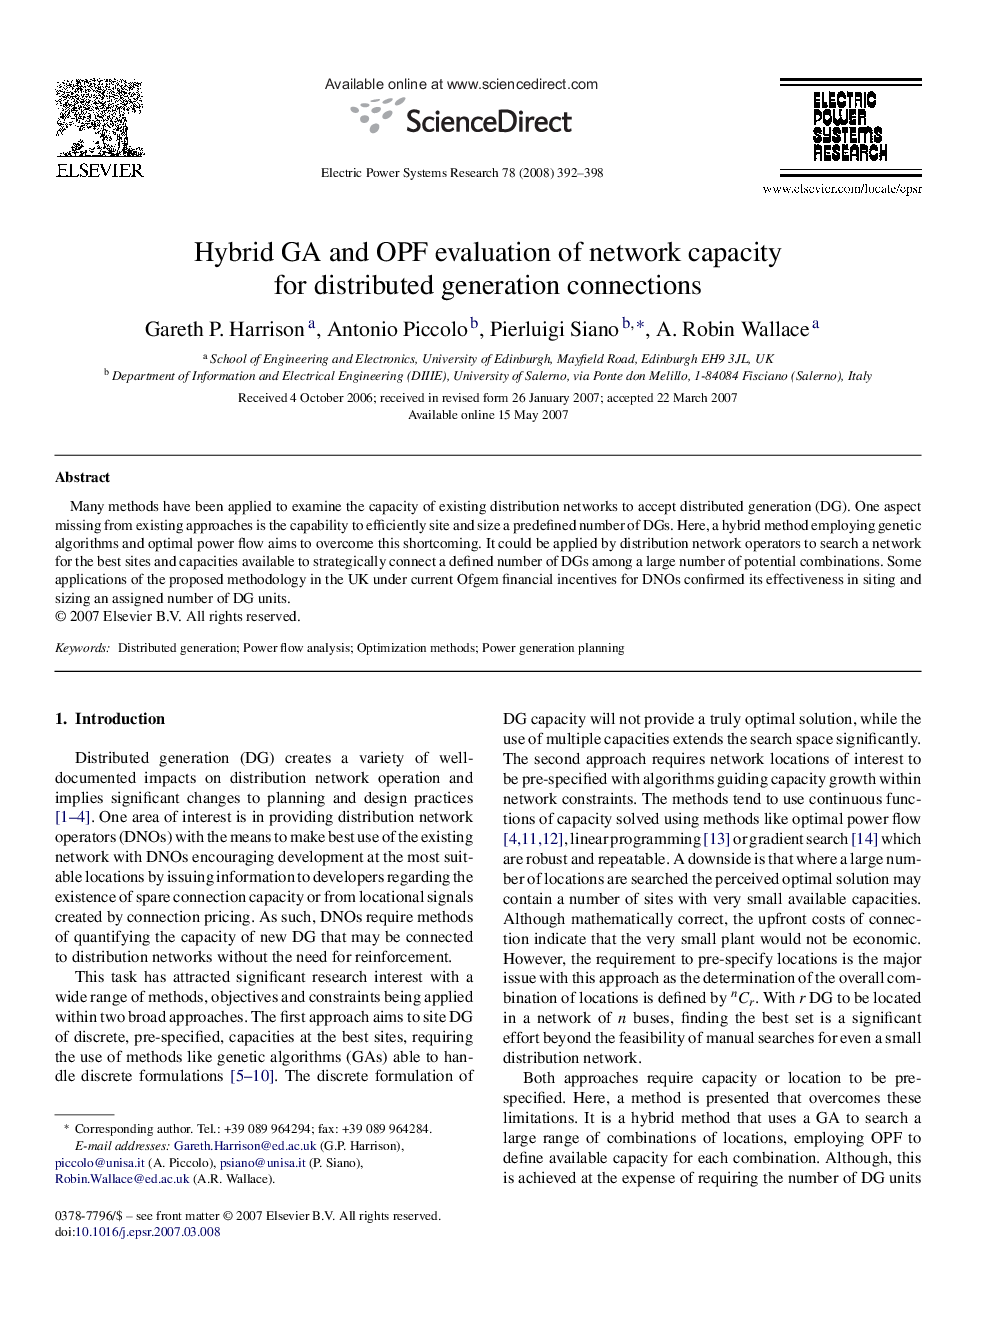 Hybrid GA and OPF evaluation of network capacity for distributed generation connections